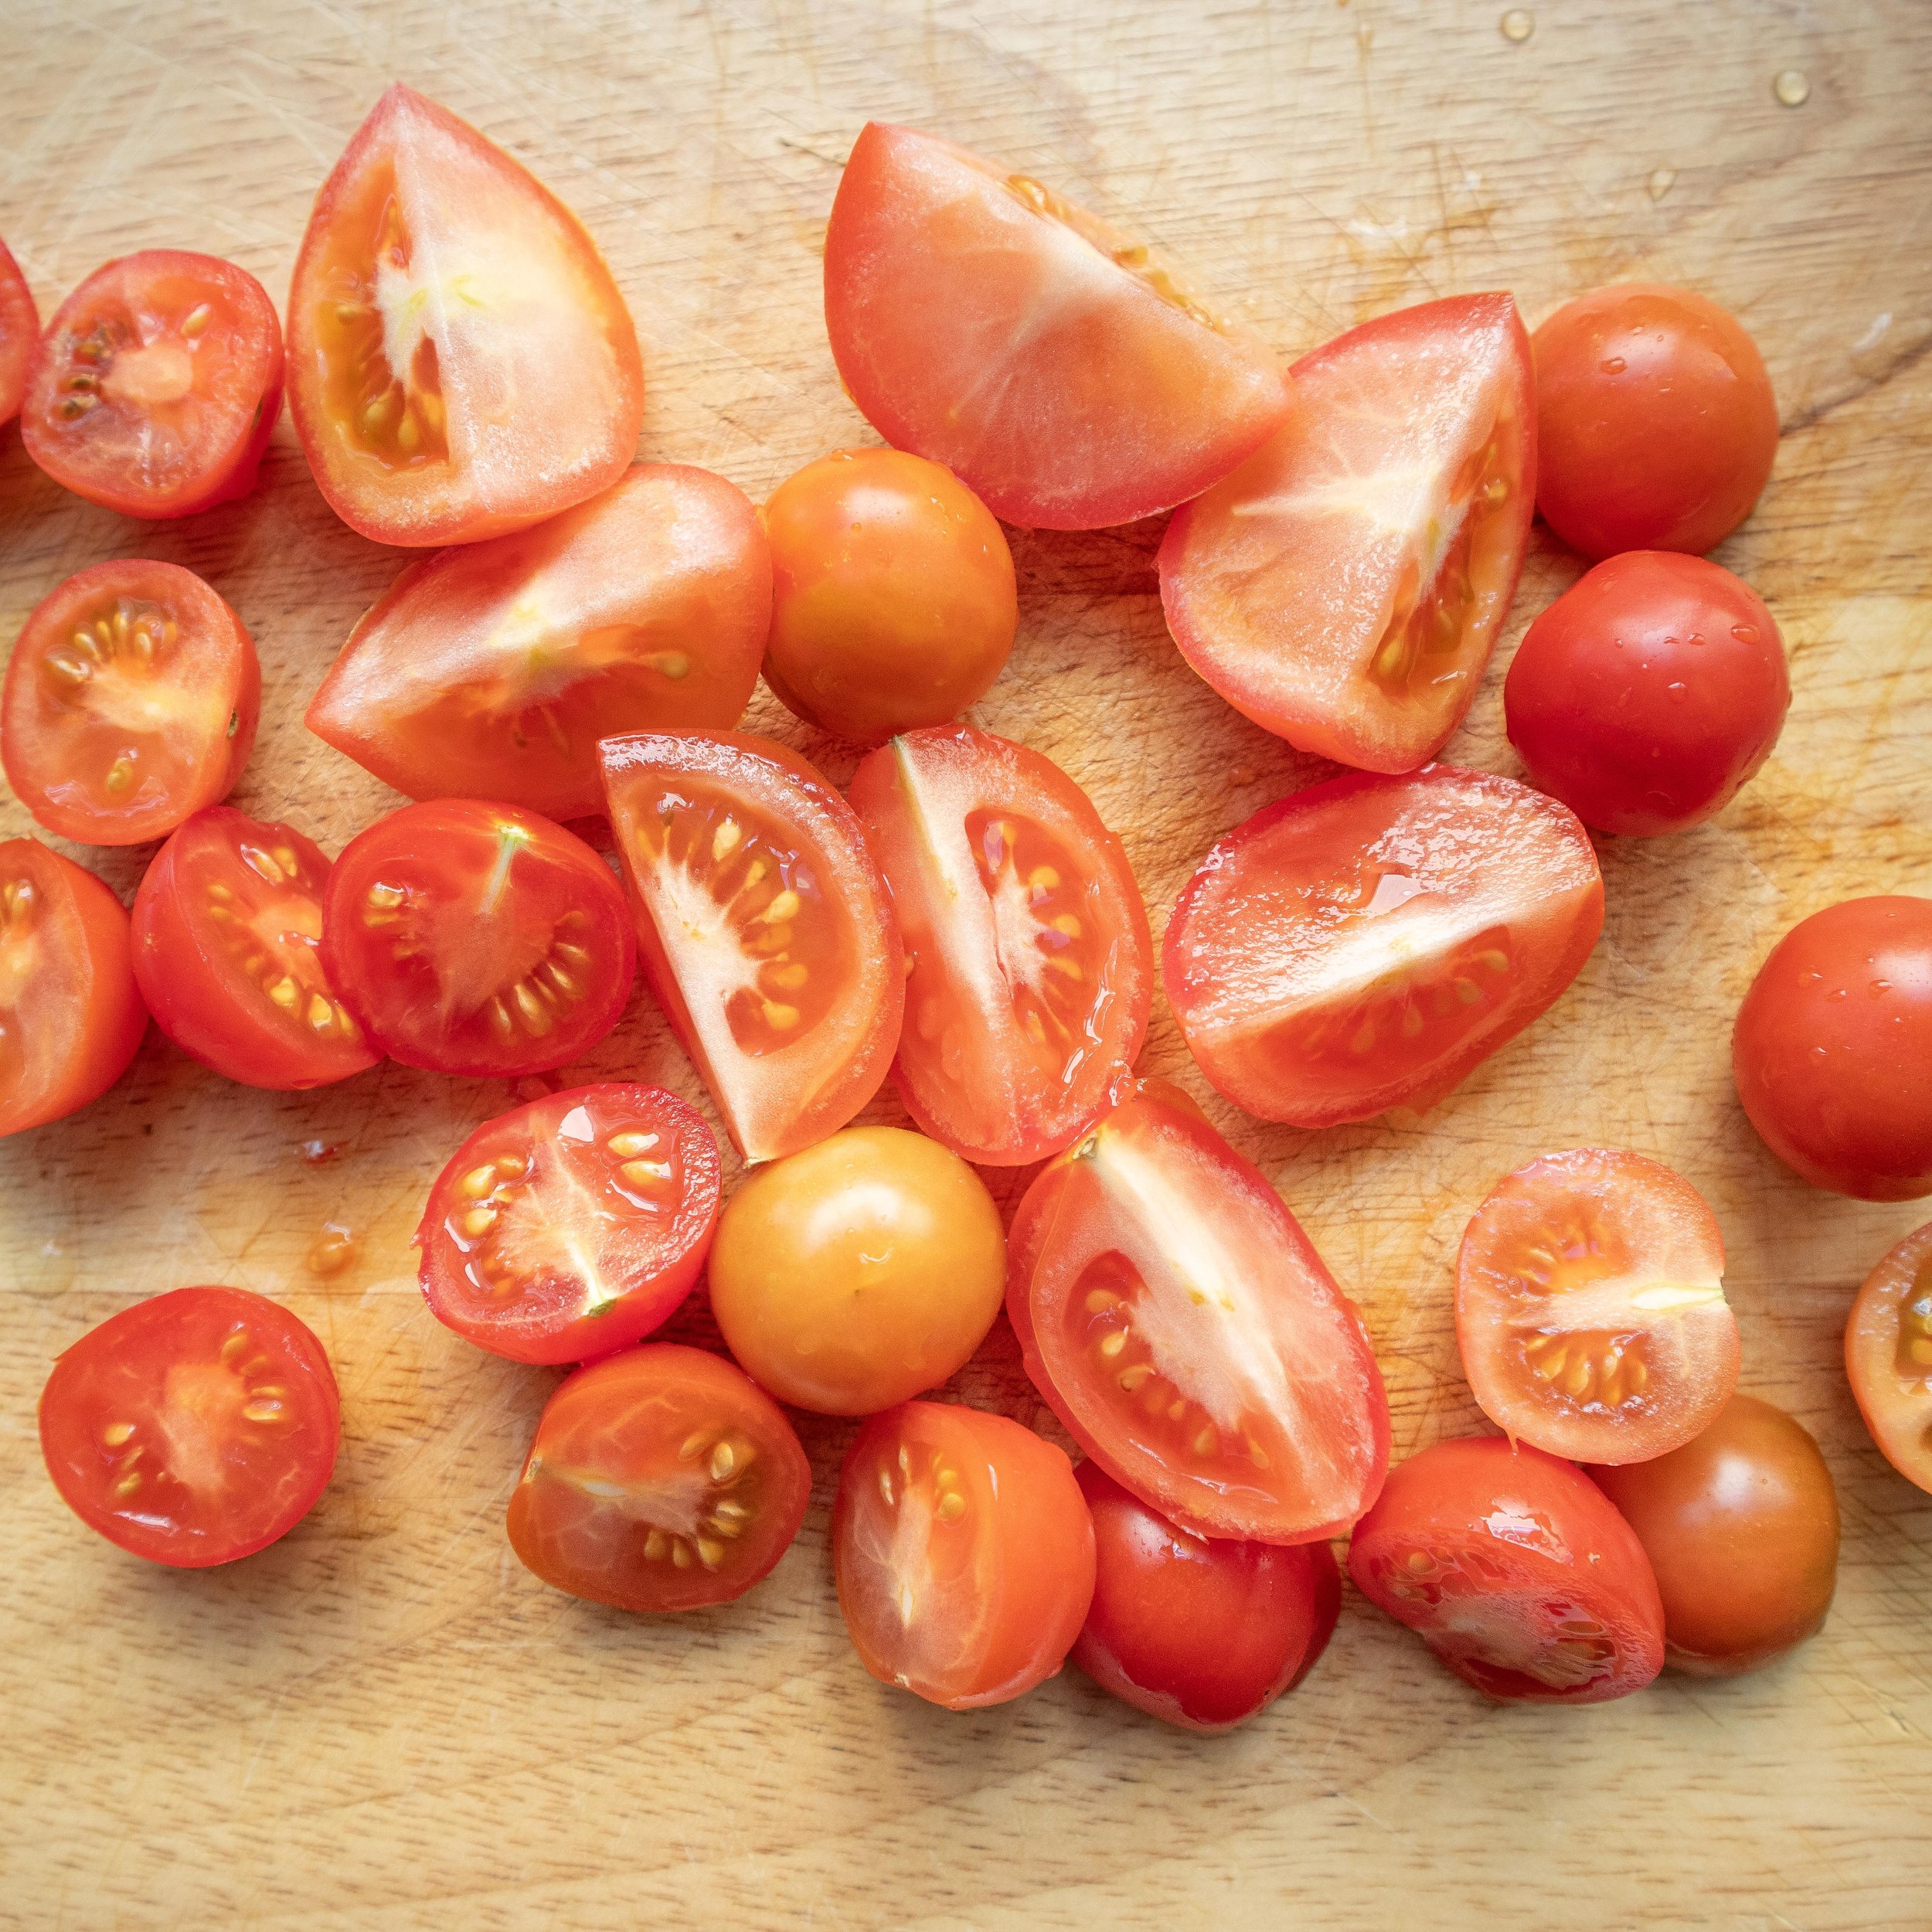 Ripe tomatoes (use any variety, cut into halves, quarters, or leave whole for cherry tomatoes)